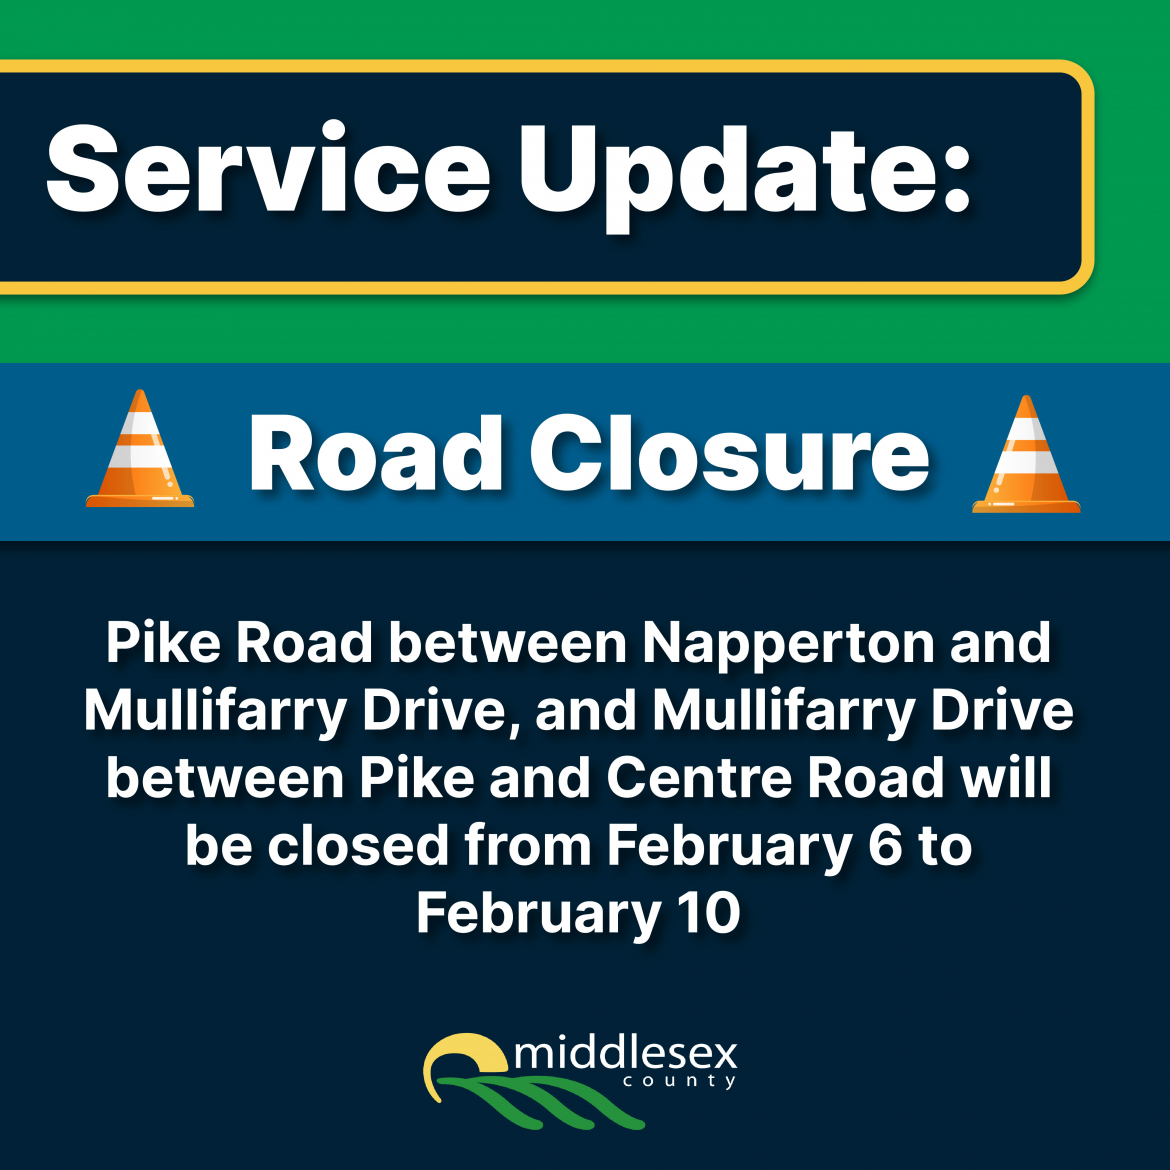 Pike Road between Napperton and Mullifarry Drive, and Mullifarry Drive between Pike and Centre Road will be closed from February 6 to February 10